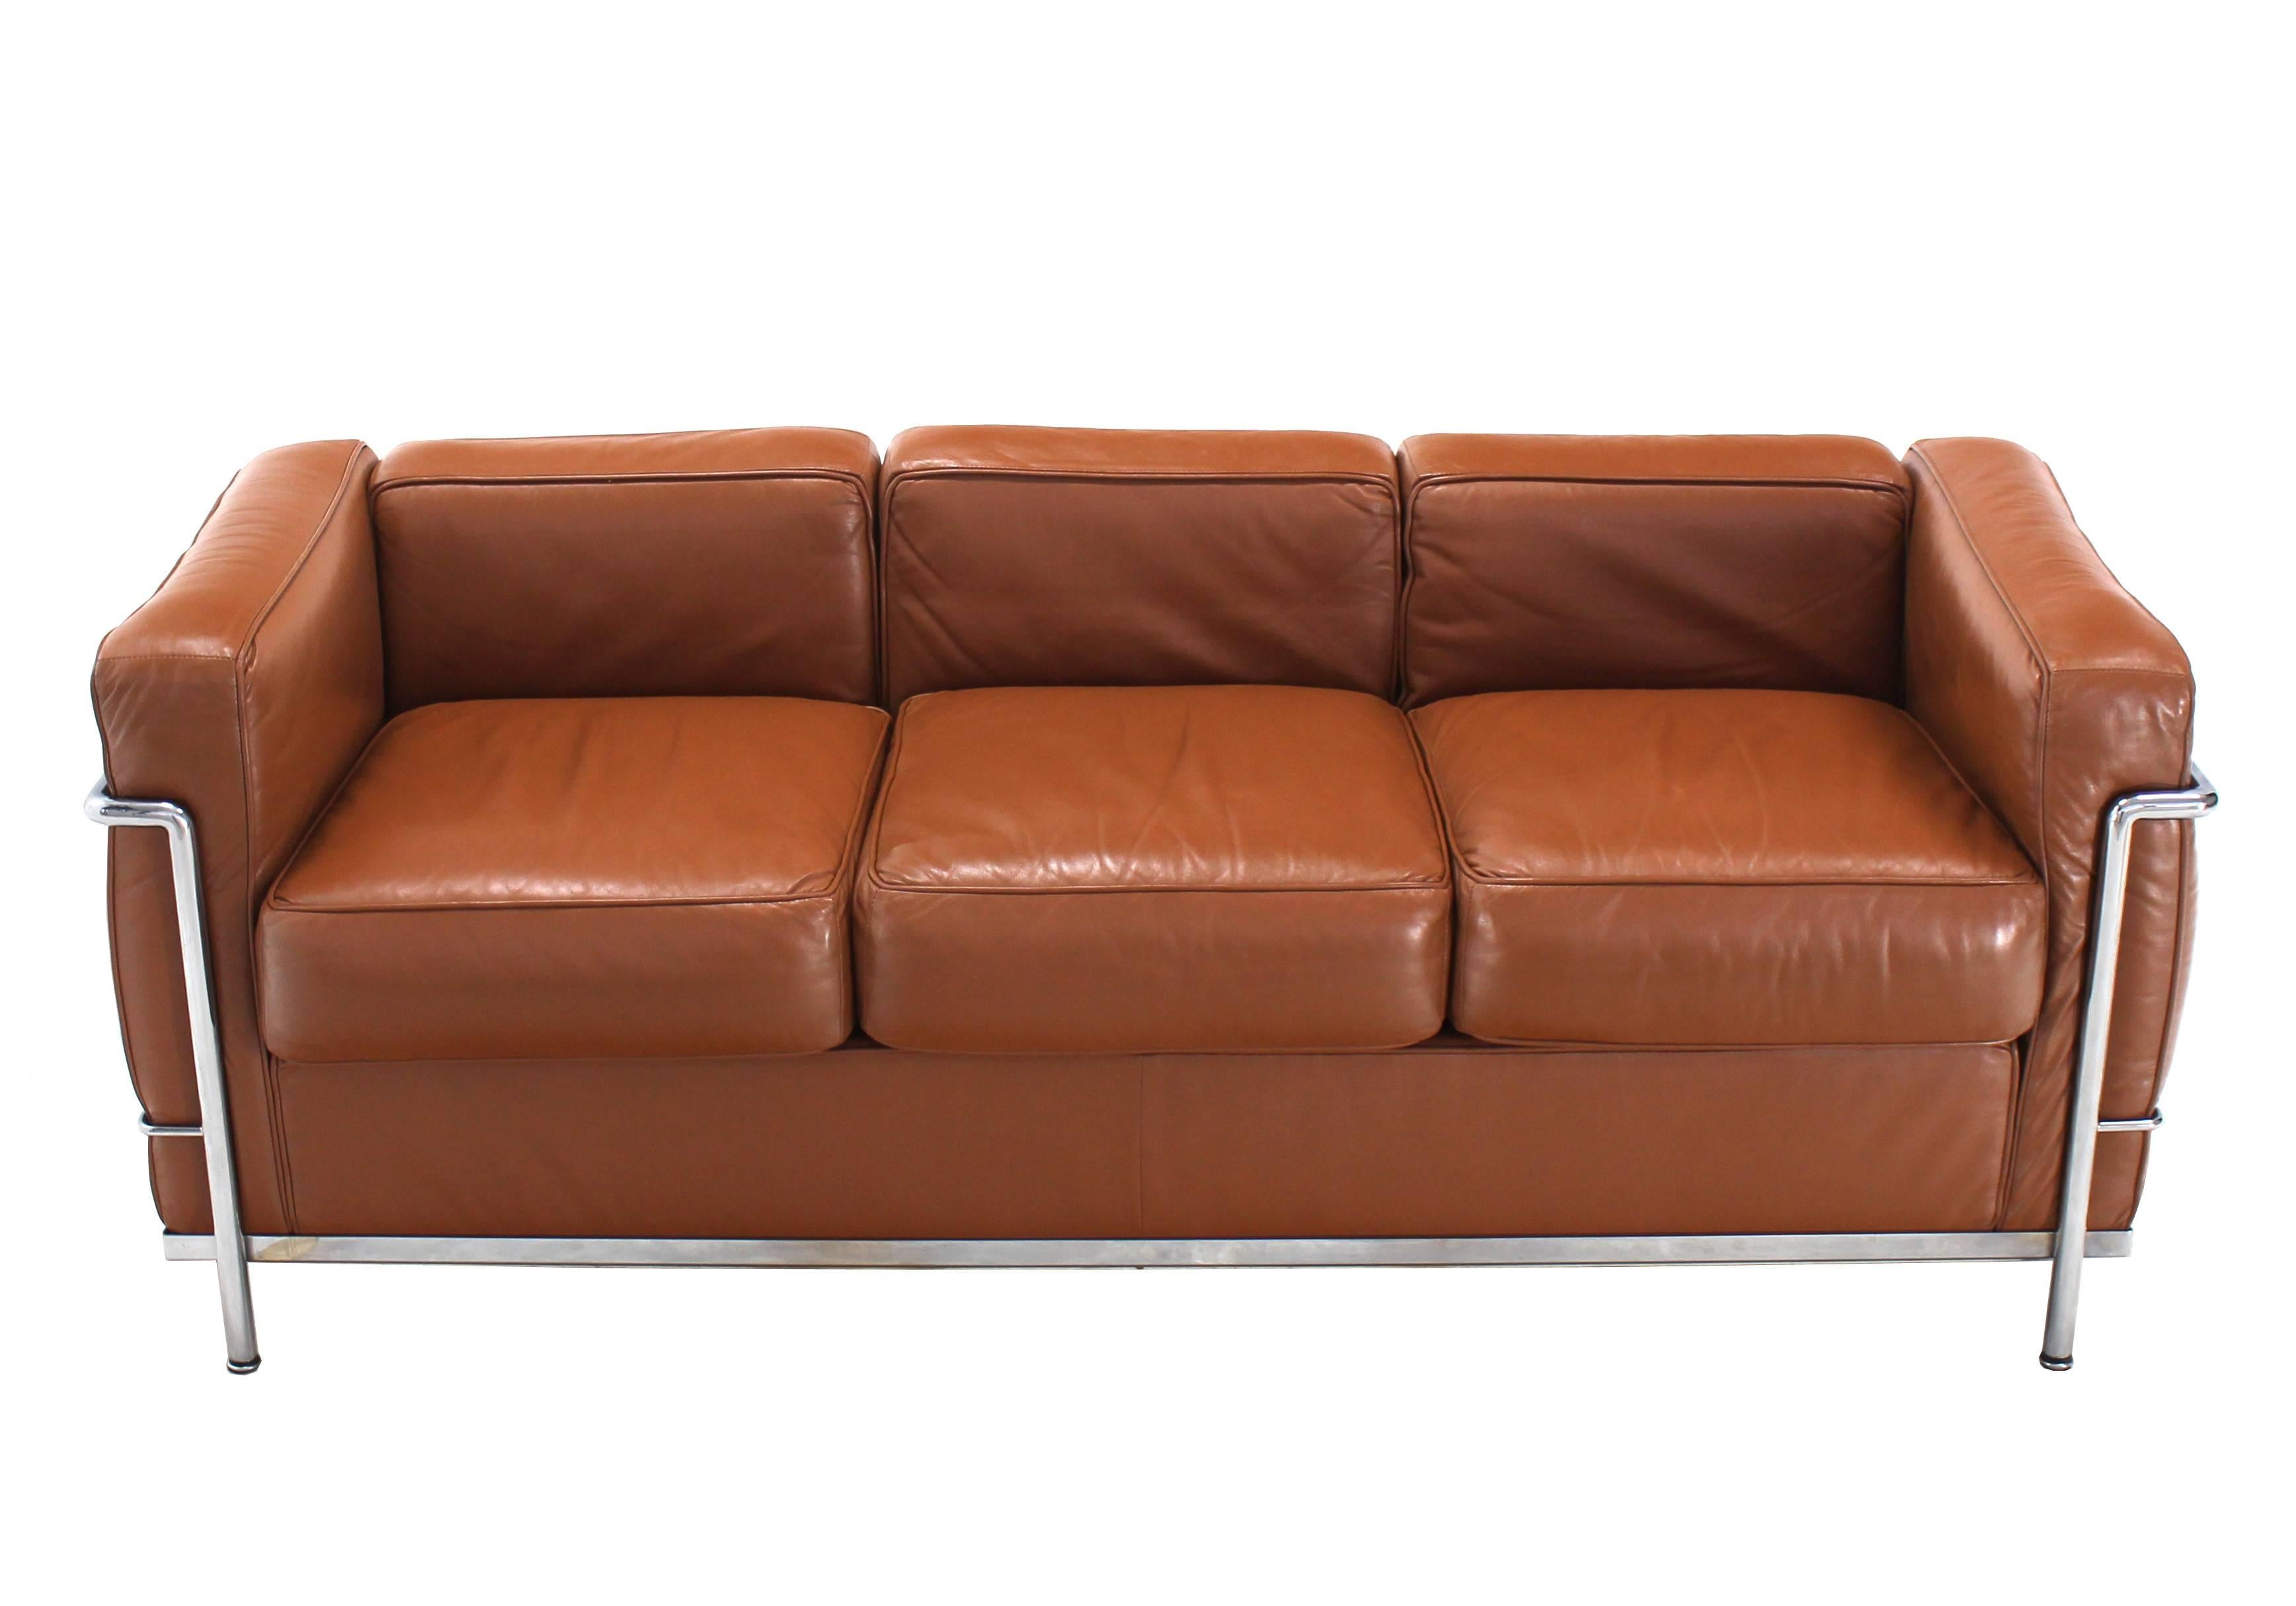 Authentic Cassina LC2 three-seat sofa in beautiful brown leather numbered and stamped in excellent vintage condition. We have matching chairs listed separately.